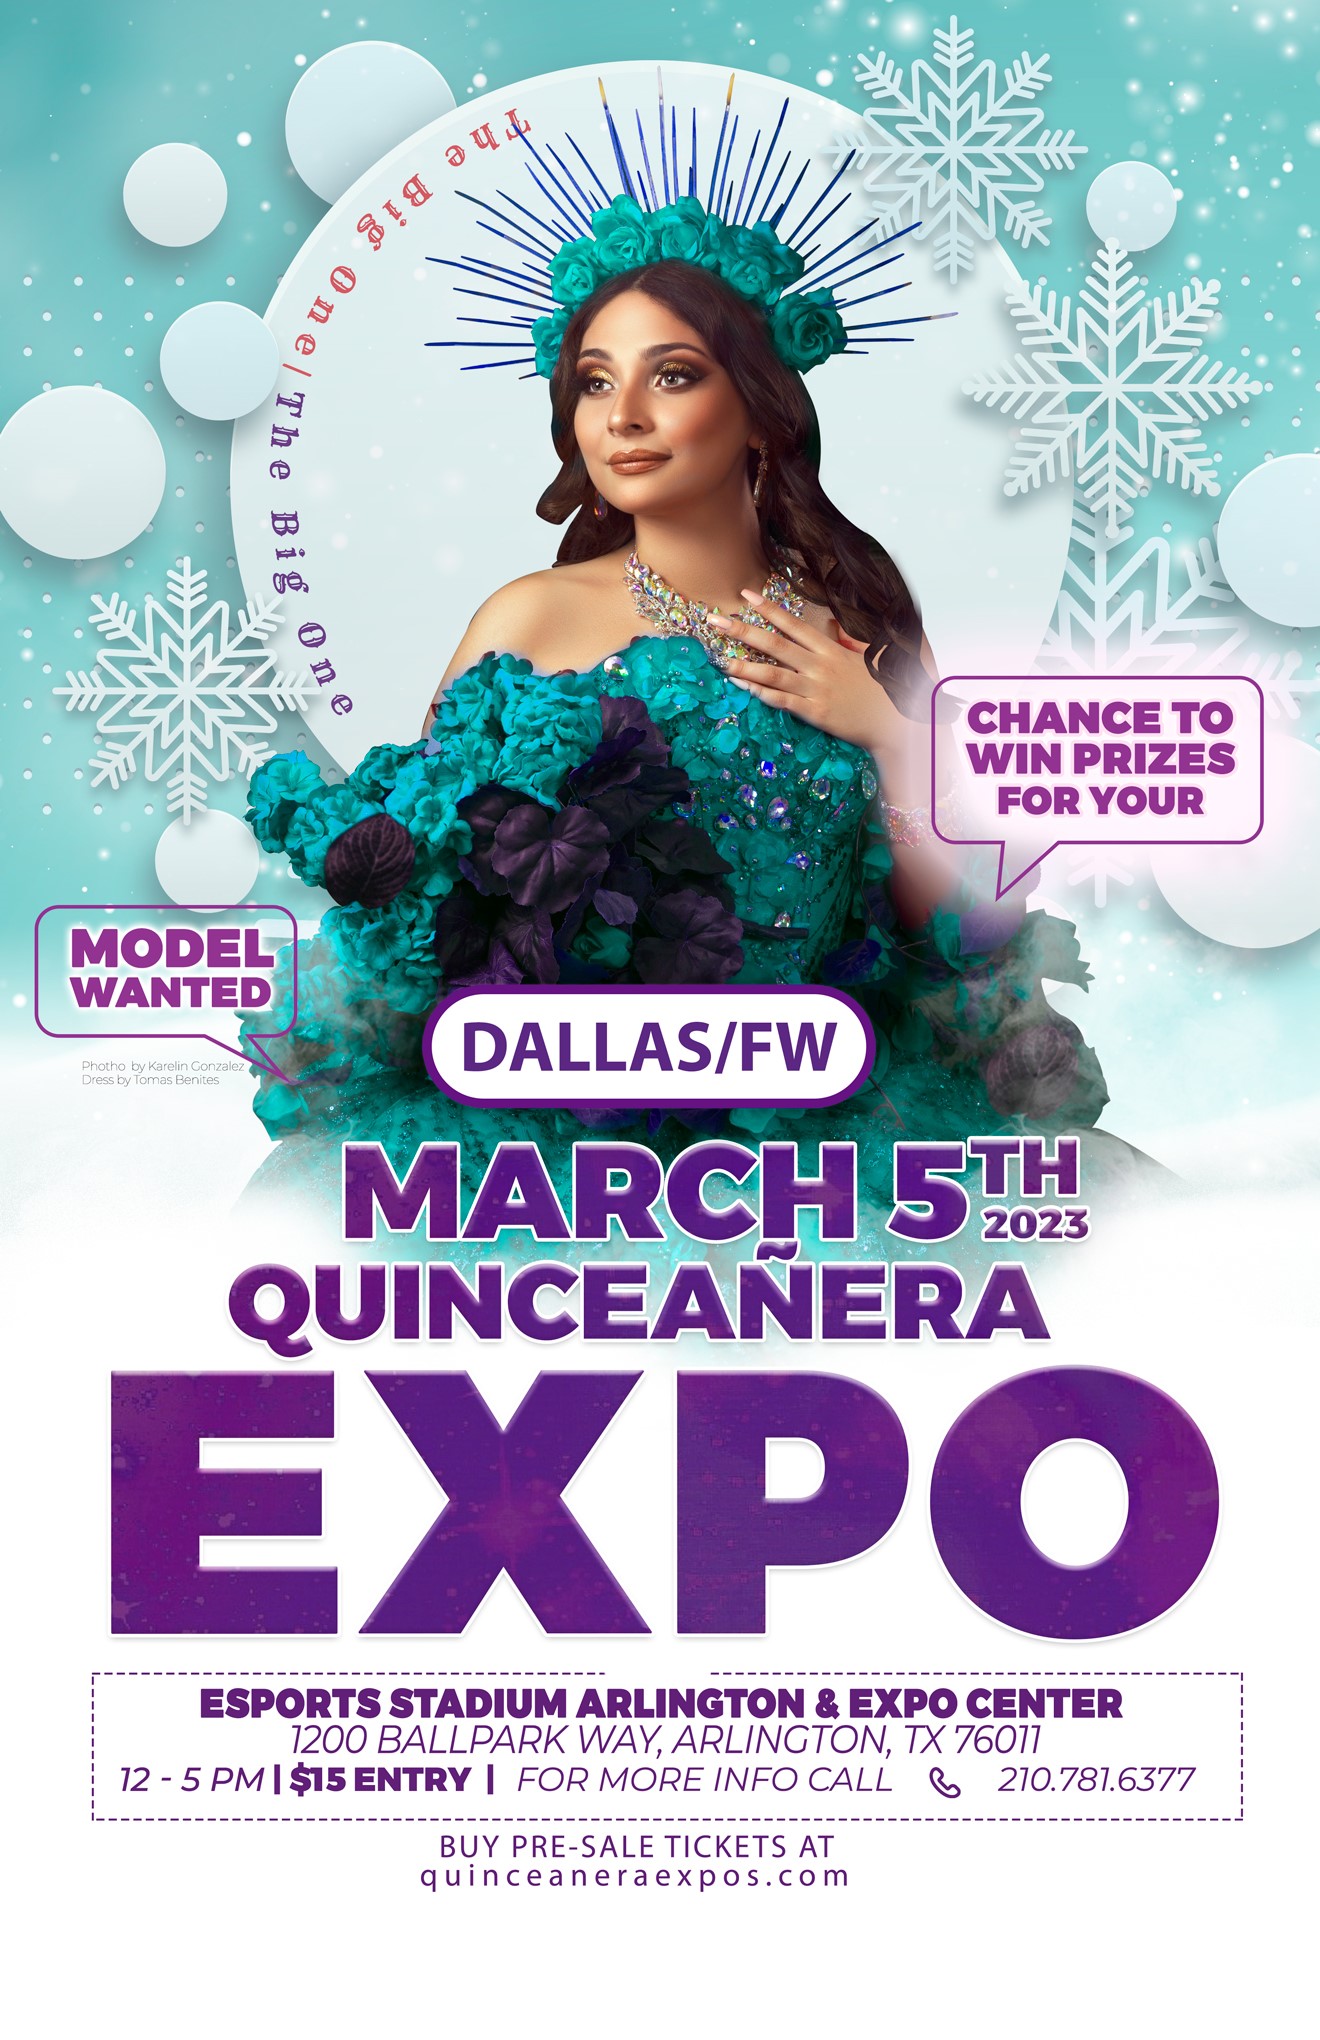 The Big One Dallas Quinceanera Expo 03/05/2023 Arlington Expo Center  on Mar 05, 11:30@Esports Stadium Arlington & Expo Center - Buy tickets and Get information on Quinceanera Expo 